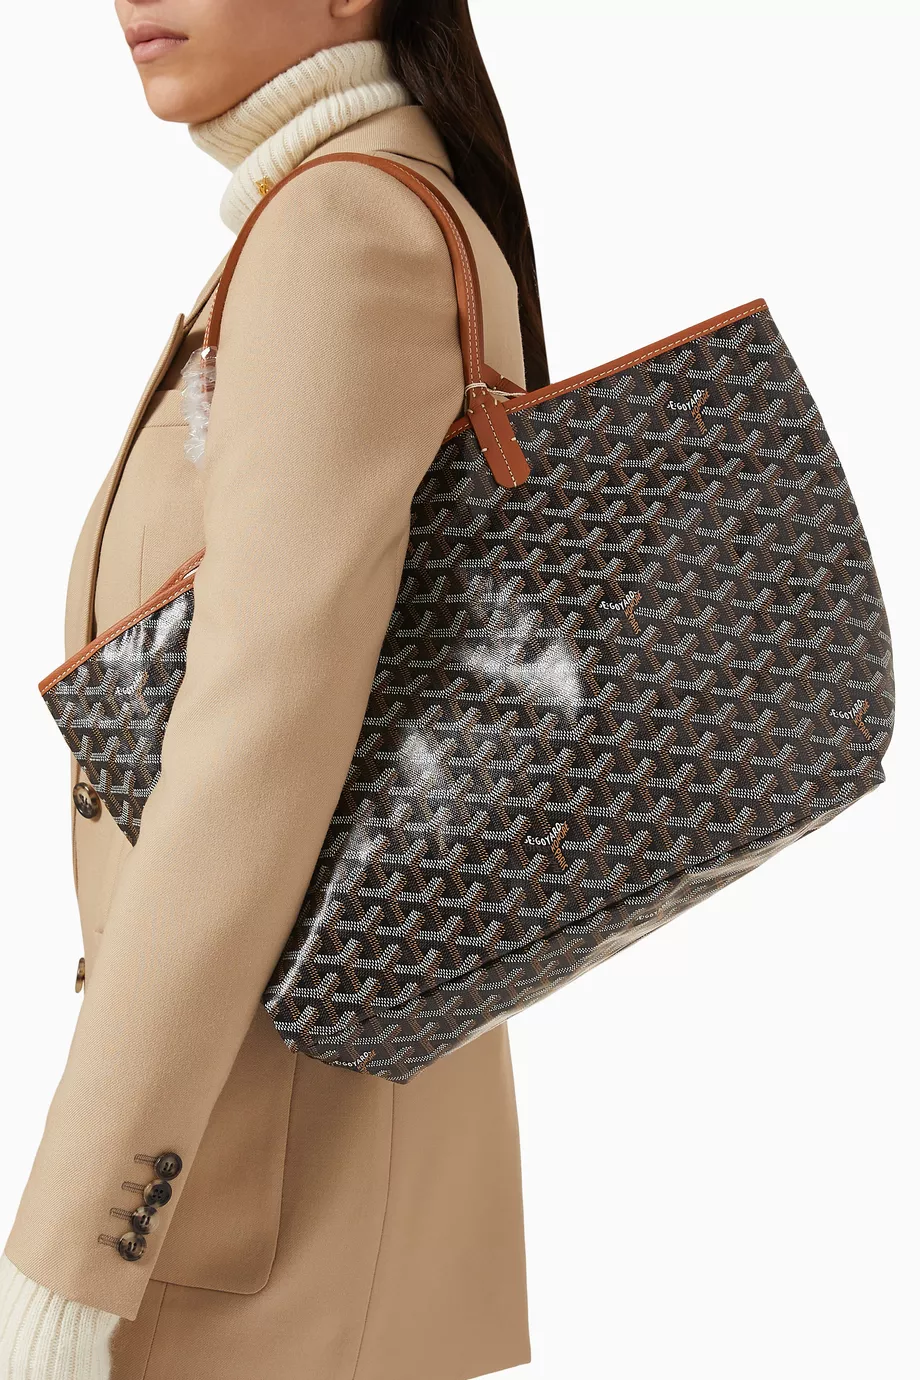 Doha.Closet - Goyard tote Bag (all colors available) Brand new Complete  inclusion QAR 6,000.00 Php 81,000.00 Pre order